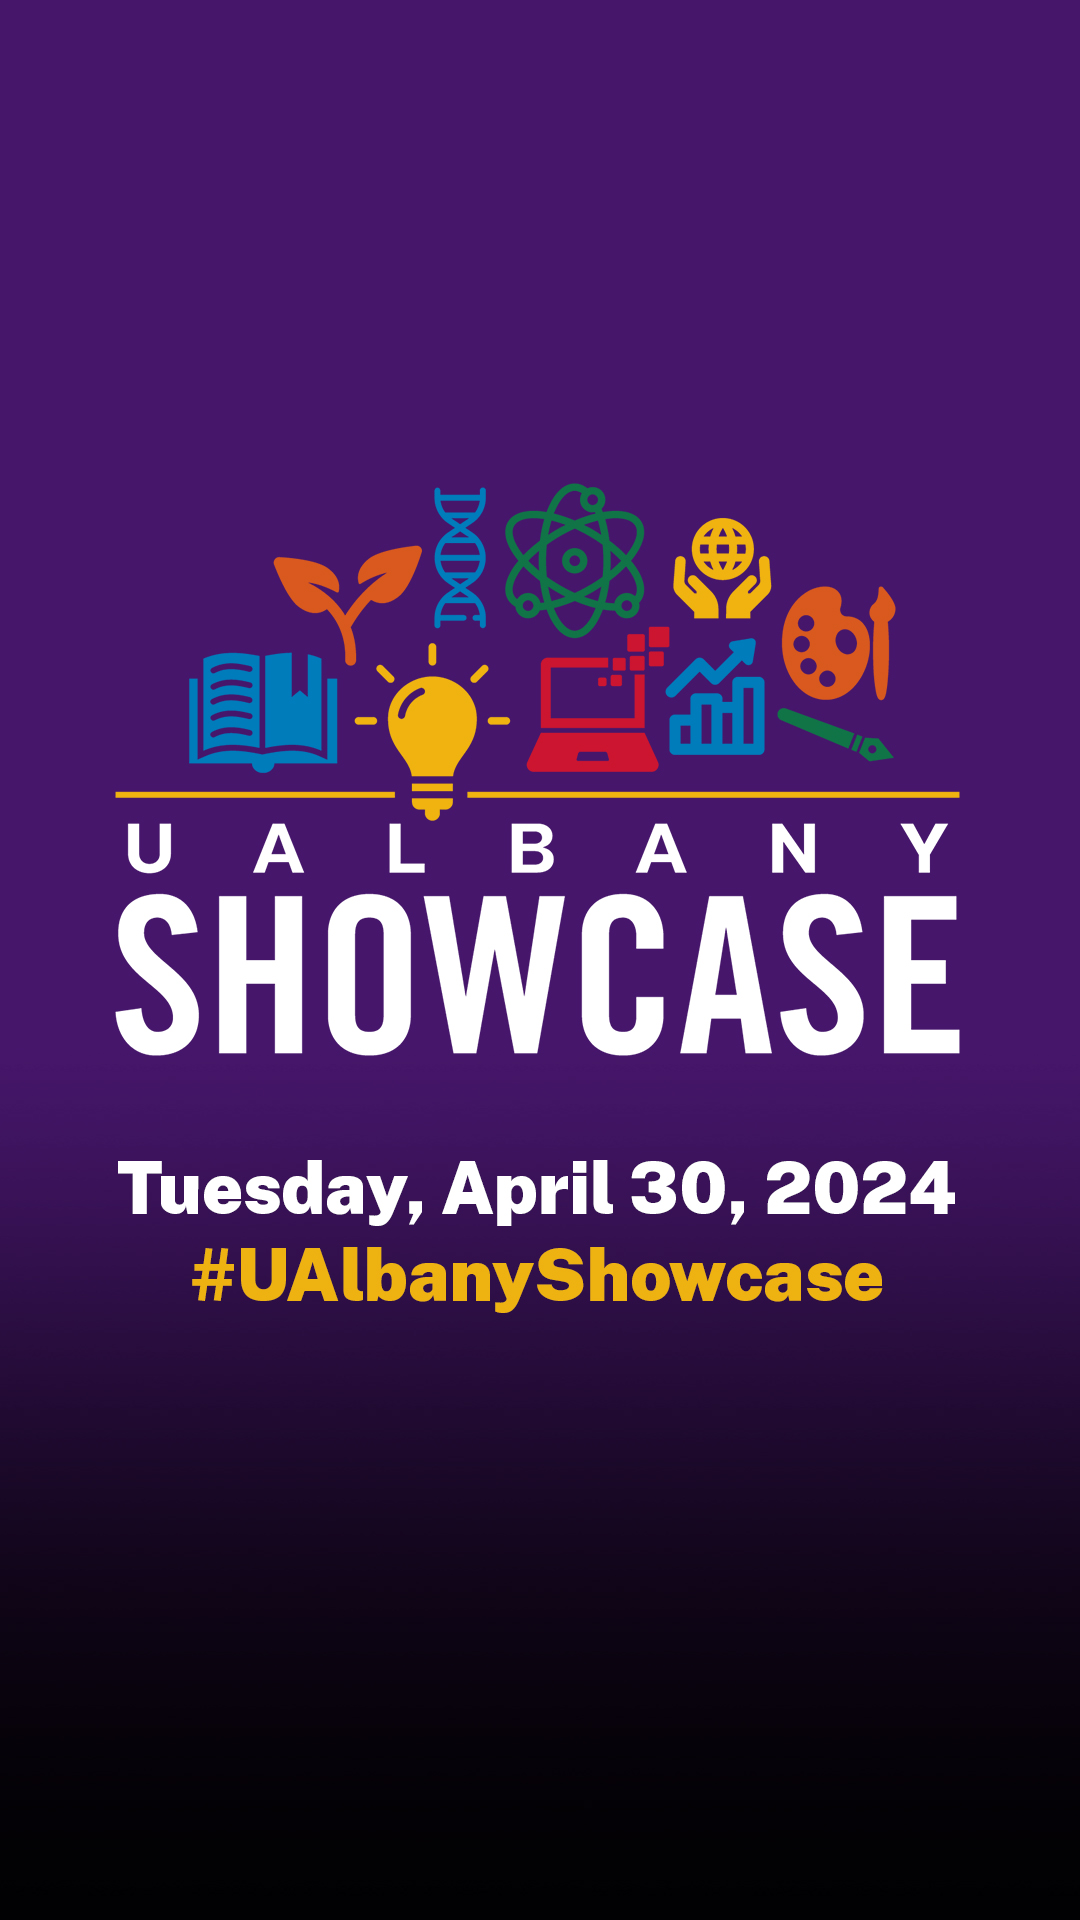 An infographic advertising the UAlbany Showcase, with the event date Tuesday, April 30, 2024, the event logo and the event hashtag #UAlbanyShowcase.